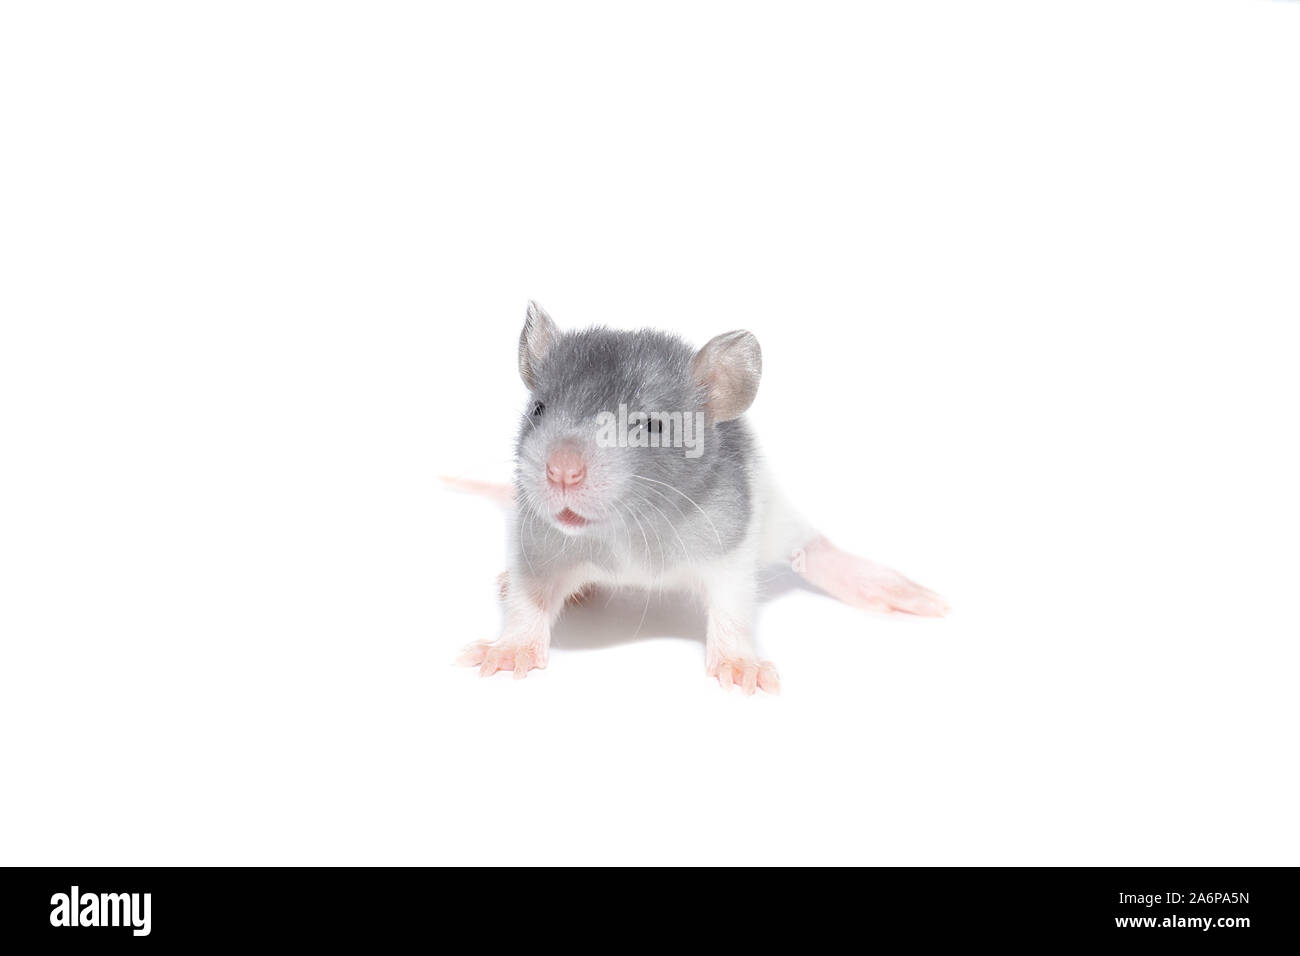 rat close-up isolated on white background, rat on new year and Christmas Stock Photo